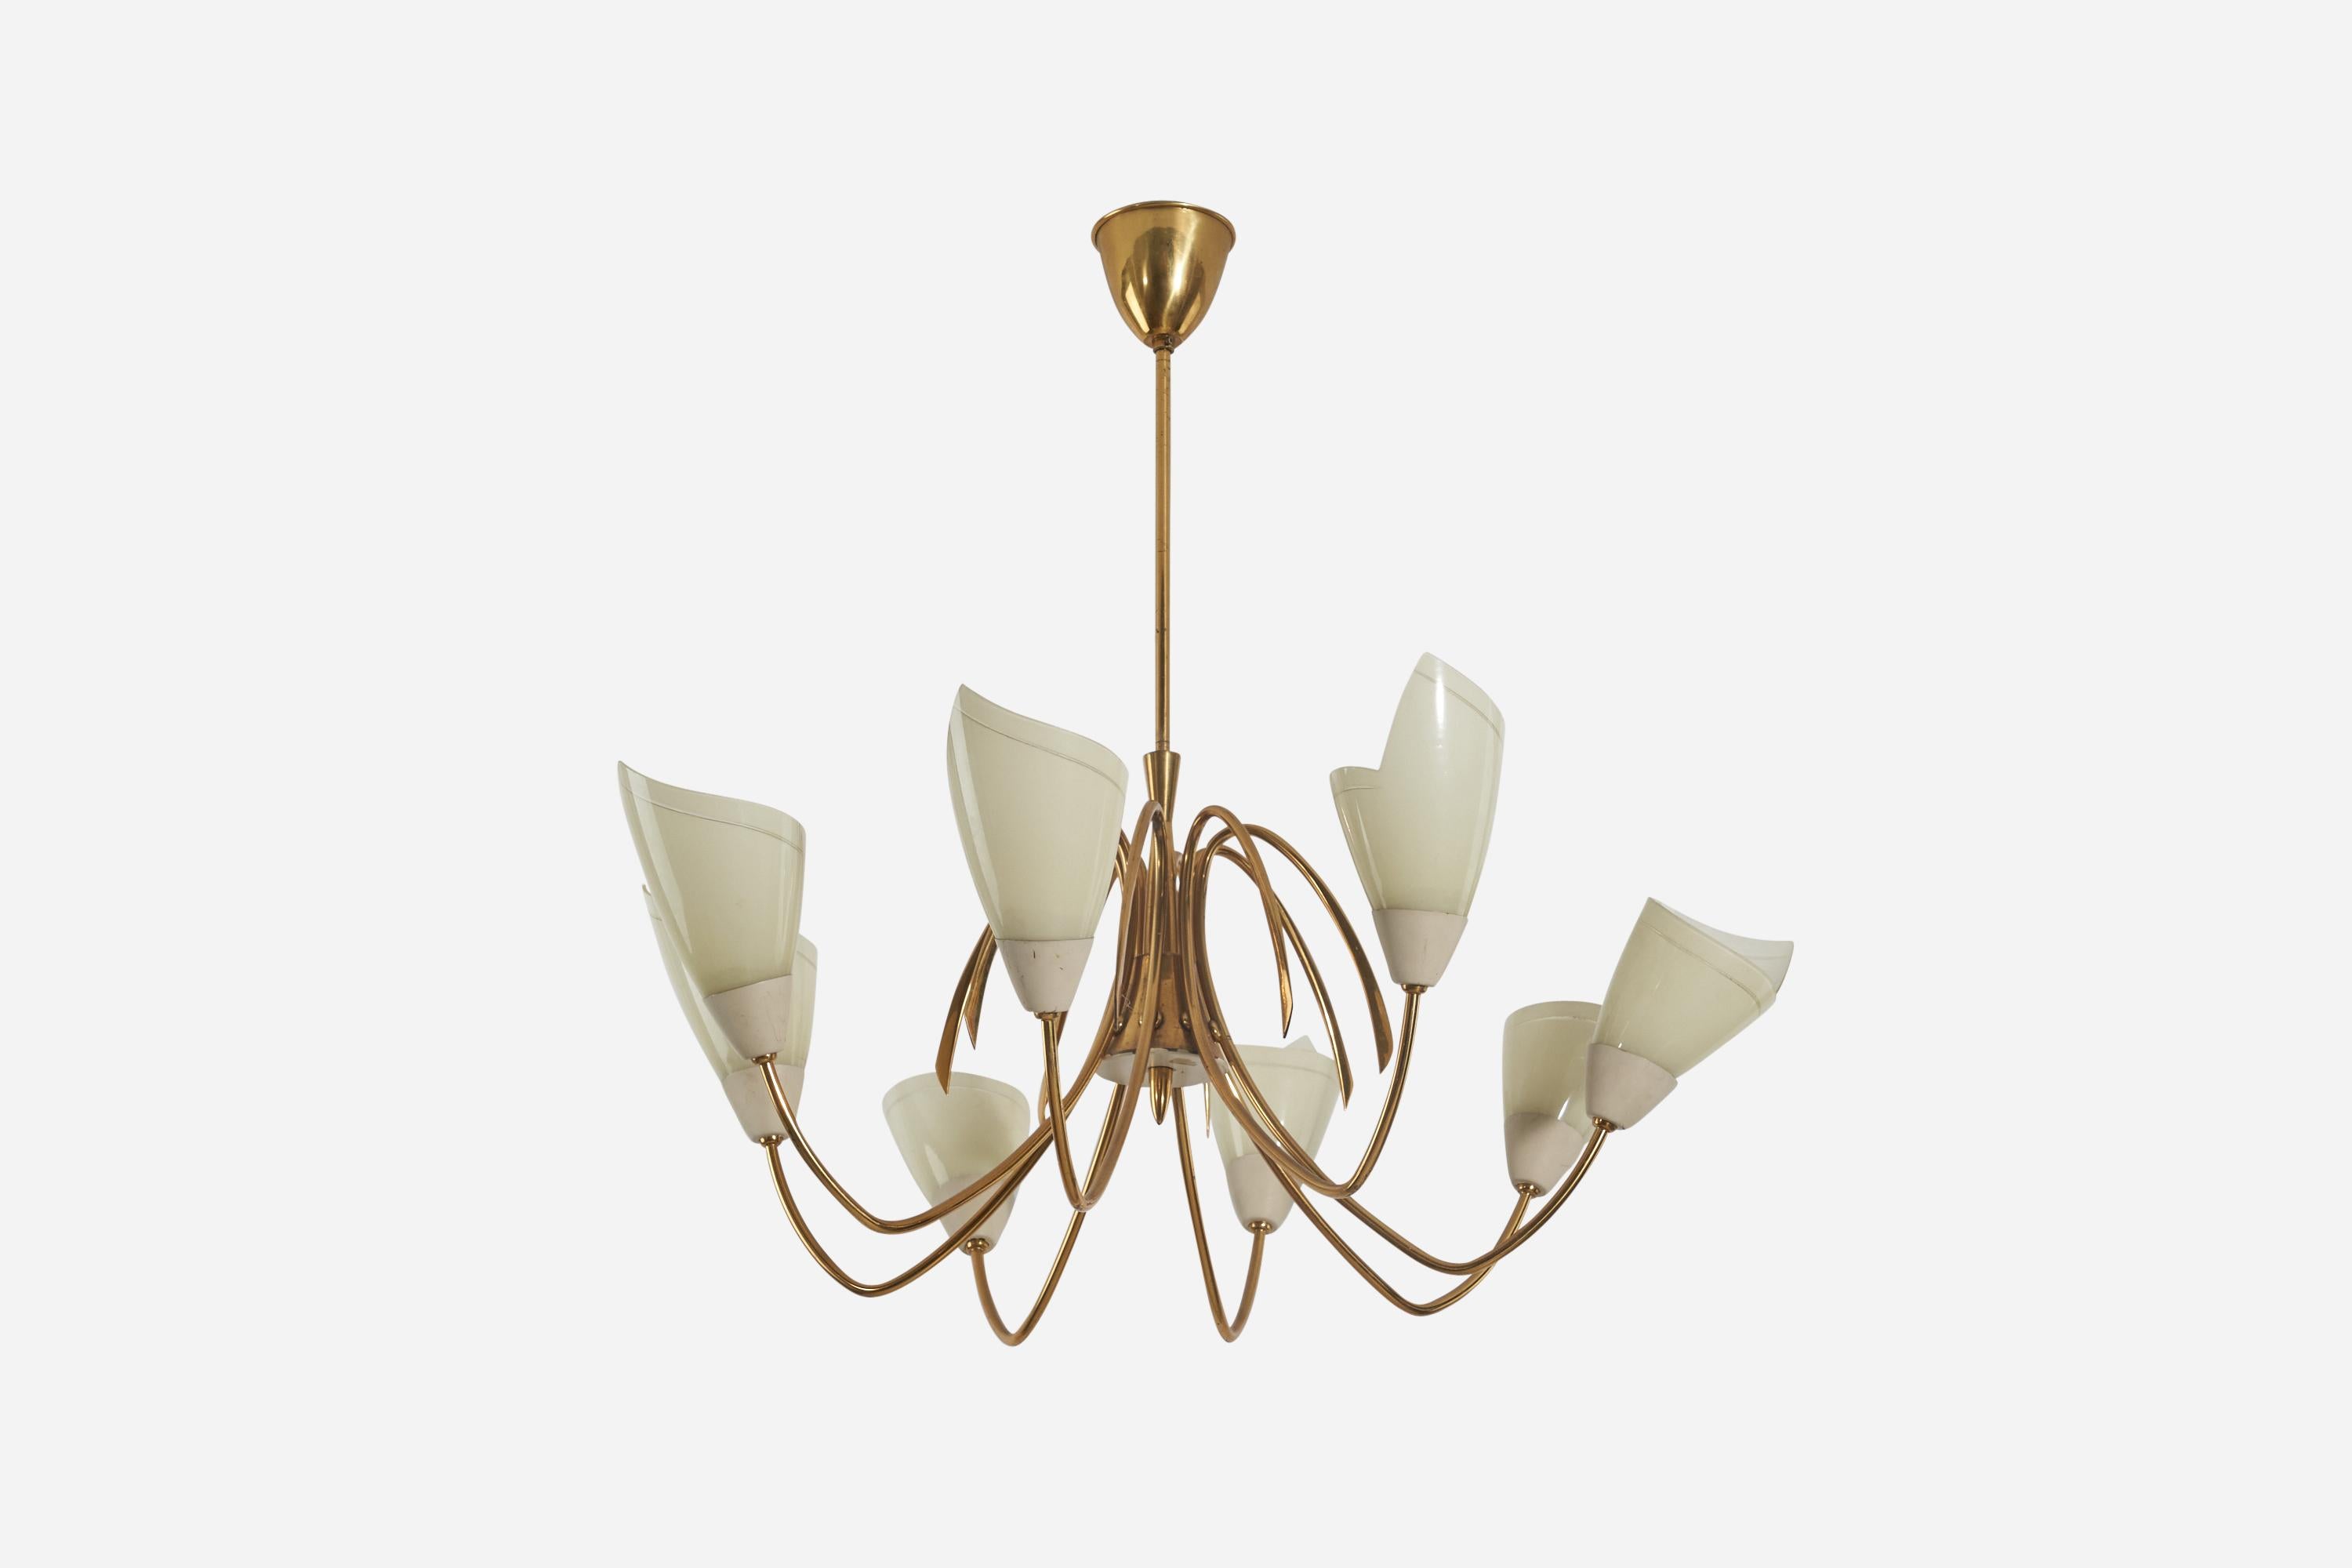 A brass, metal and acrylic chandelier designed and produced by a Swedish designer, Sweden, 1950s.

Dimensions of Canopy (inches) : 3 x 3.62 x 3.62 (Height x Width x Depth).

Socket takes E-14 bulb.
There is no maximum wattage stated on the